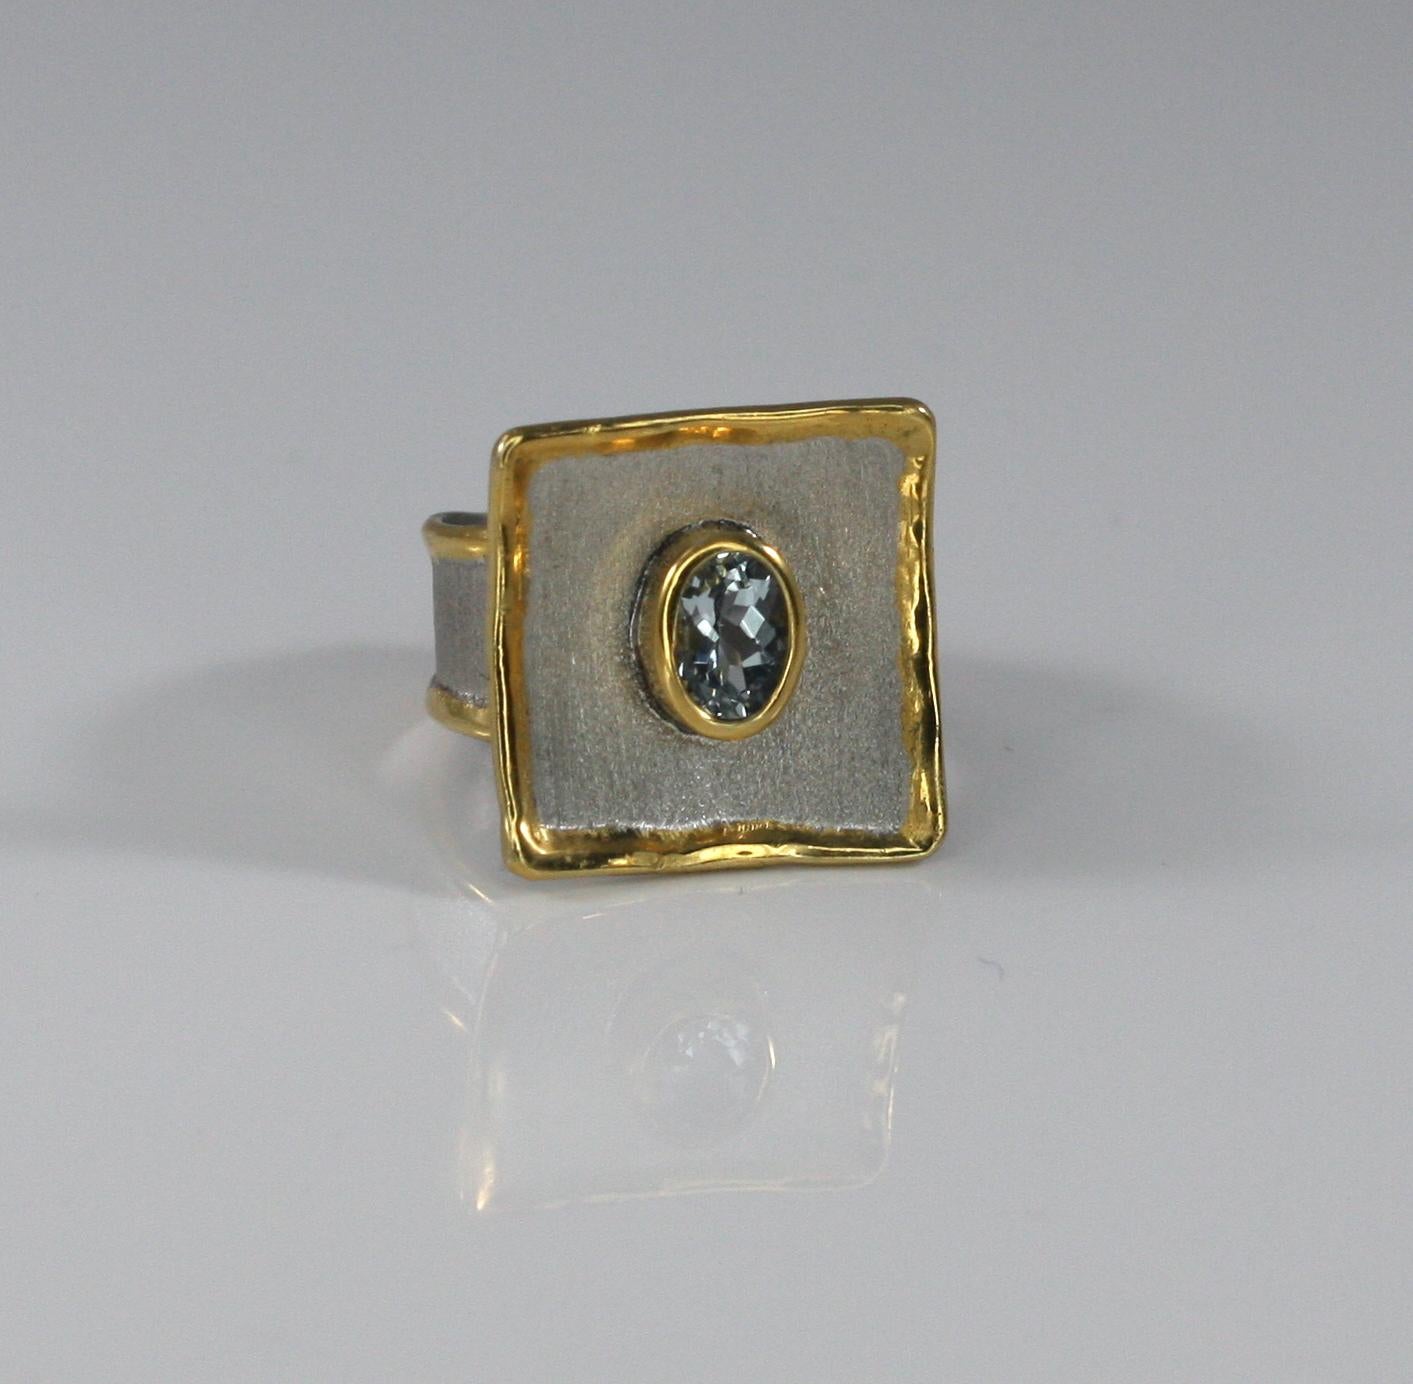 Yianni Creations handmade artisan ring is made from fine silver 950 purity plated with palladium to resist the elements. This square ring from Midas Collection has edges decorated with 24 Karat gold thick overlay and features 1.10 Carat Oval